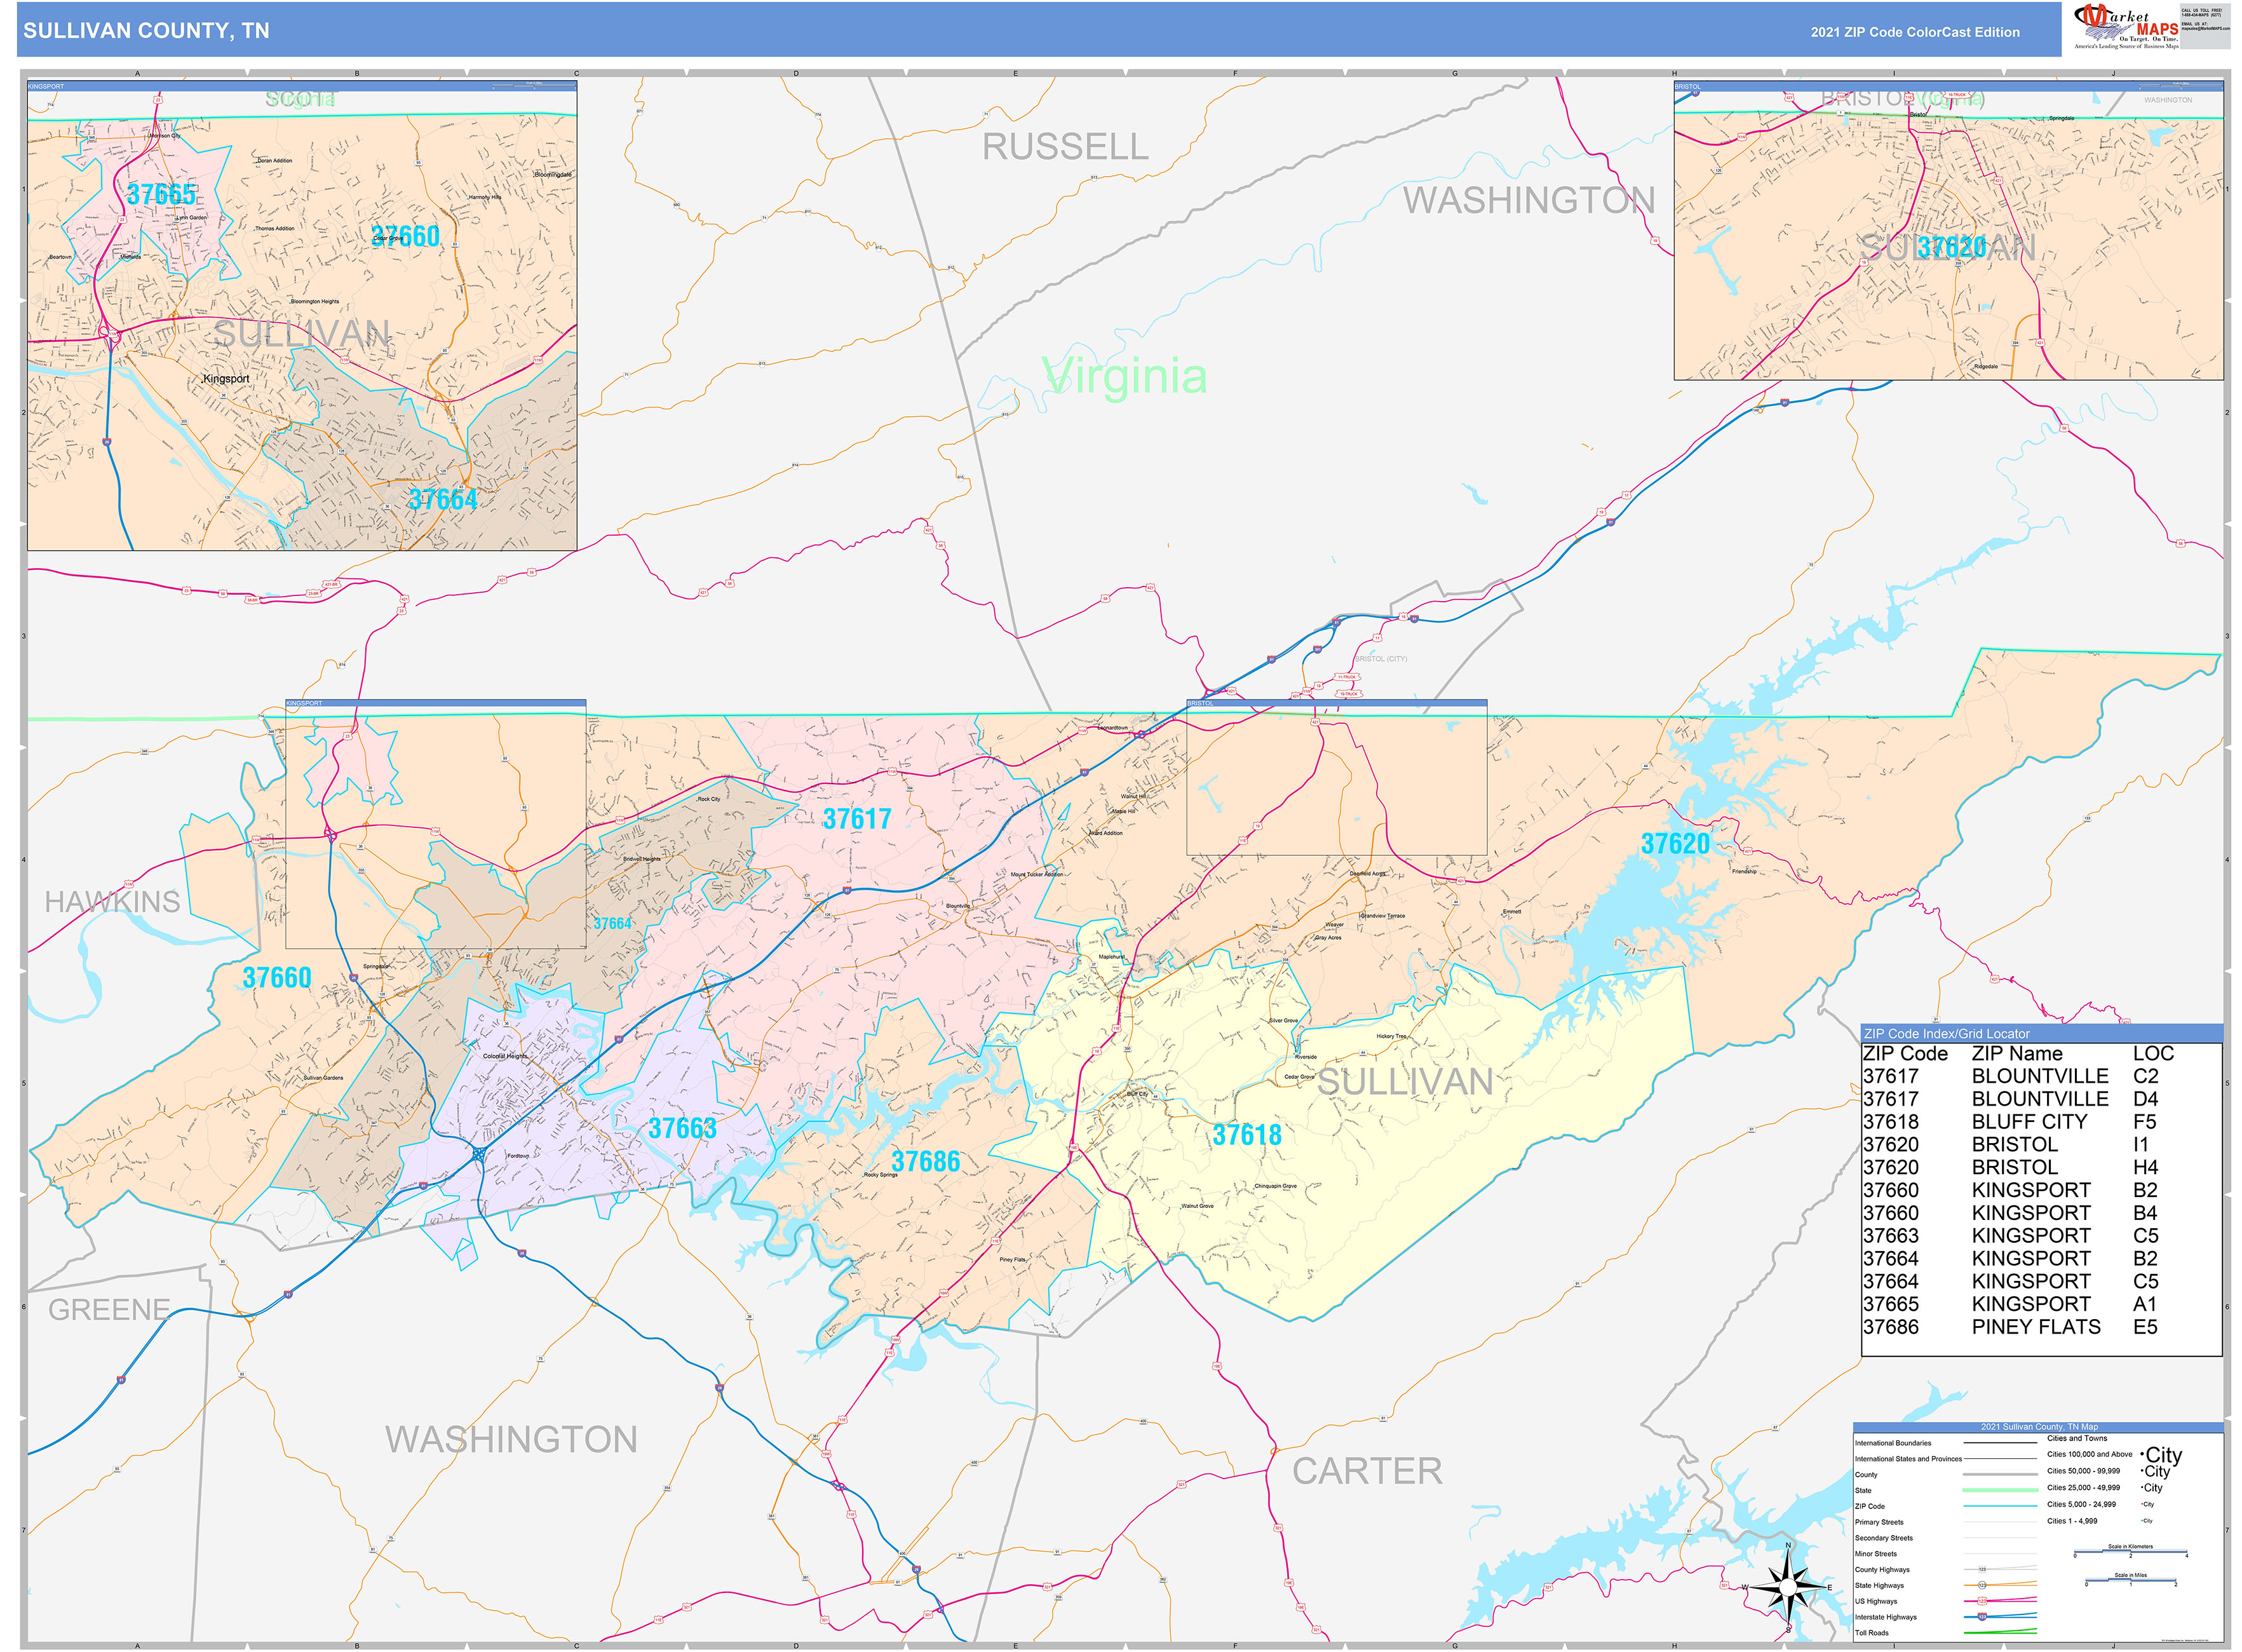 sullivan-county-tn-wall-map-color-cast-style-by-marketmaps-mapsales